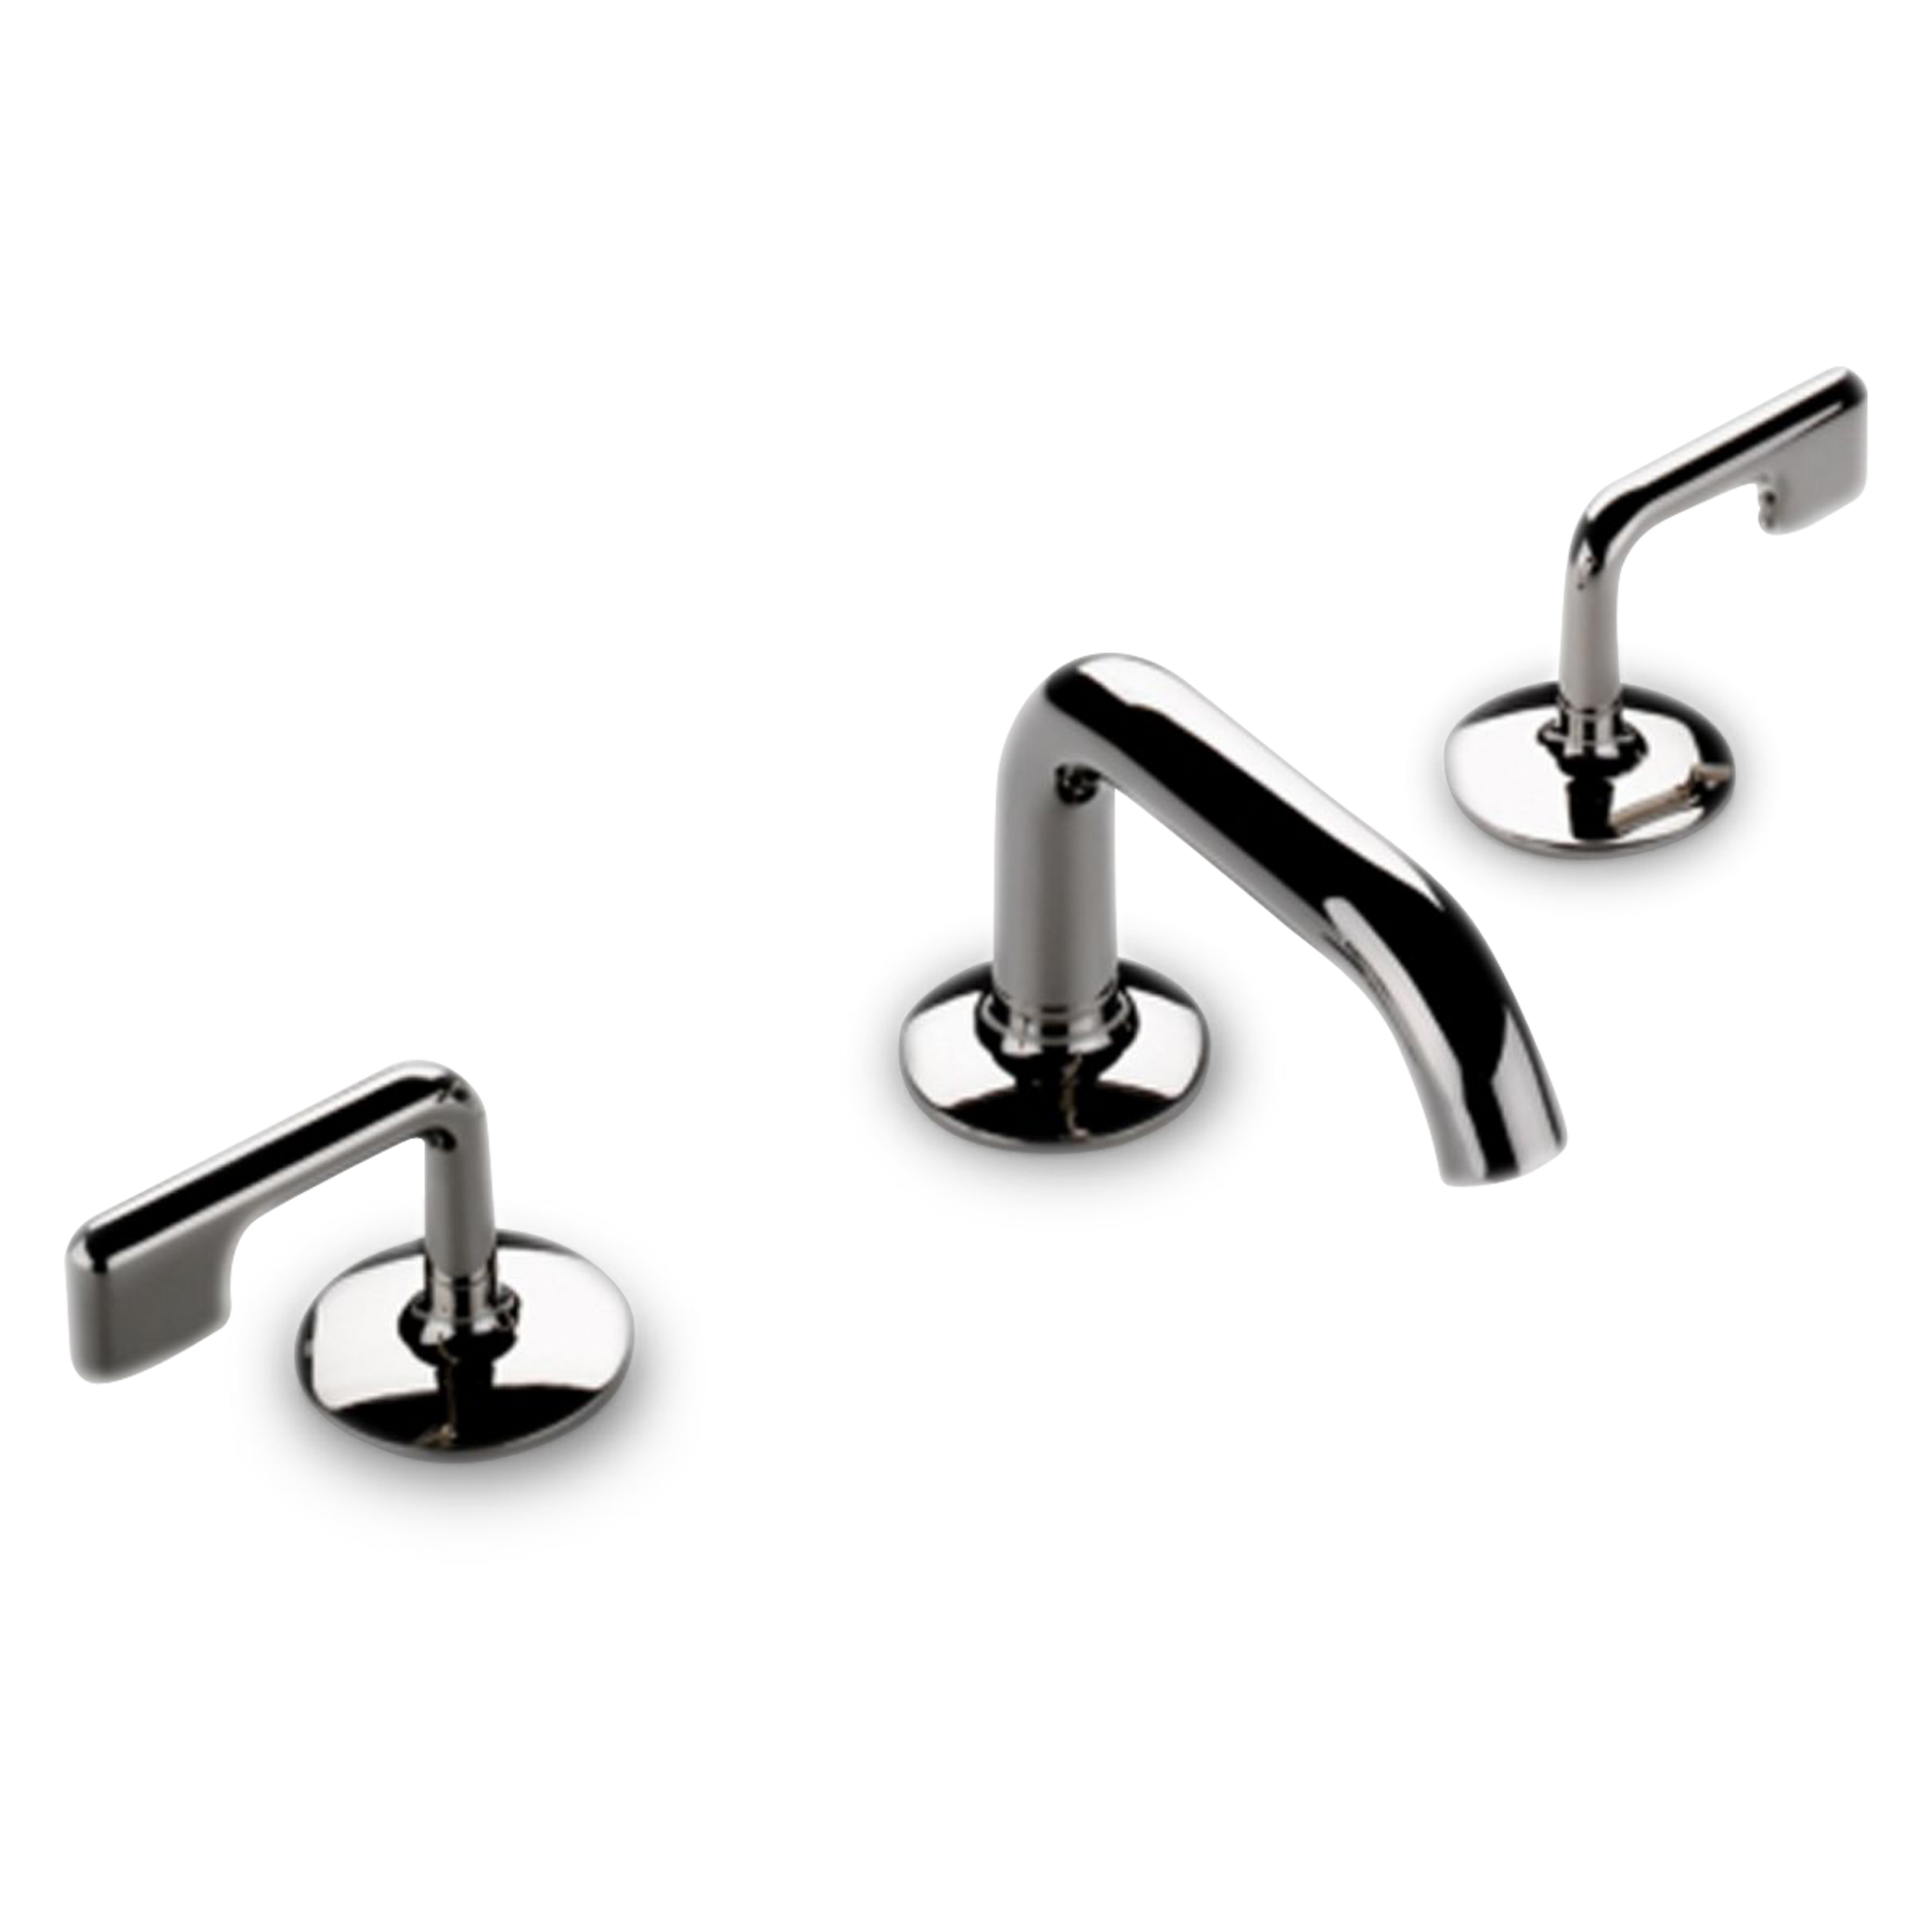 A sleek and contemporary widespread faucet with two L-shaped lever handles.